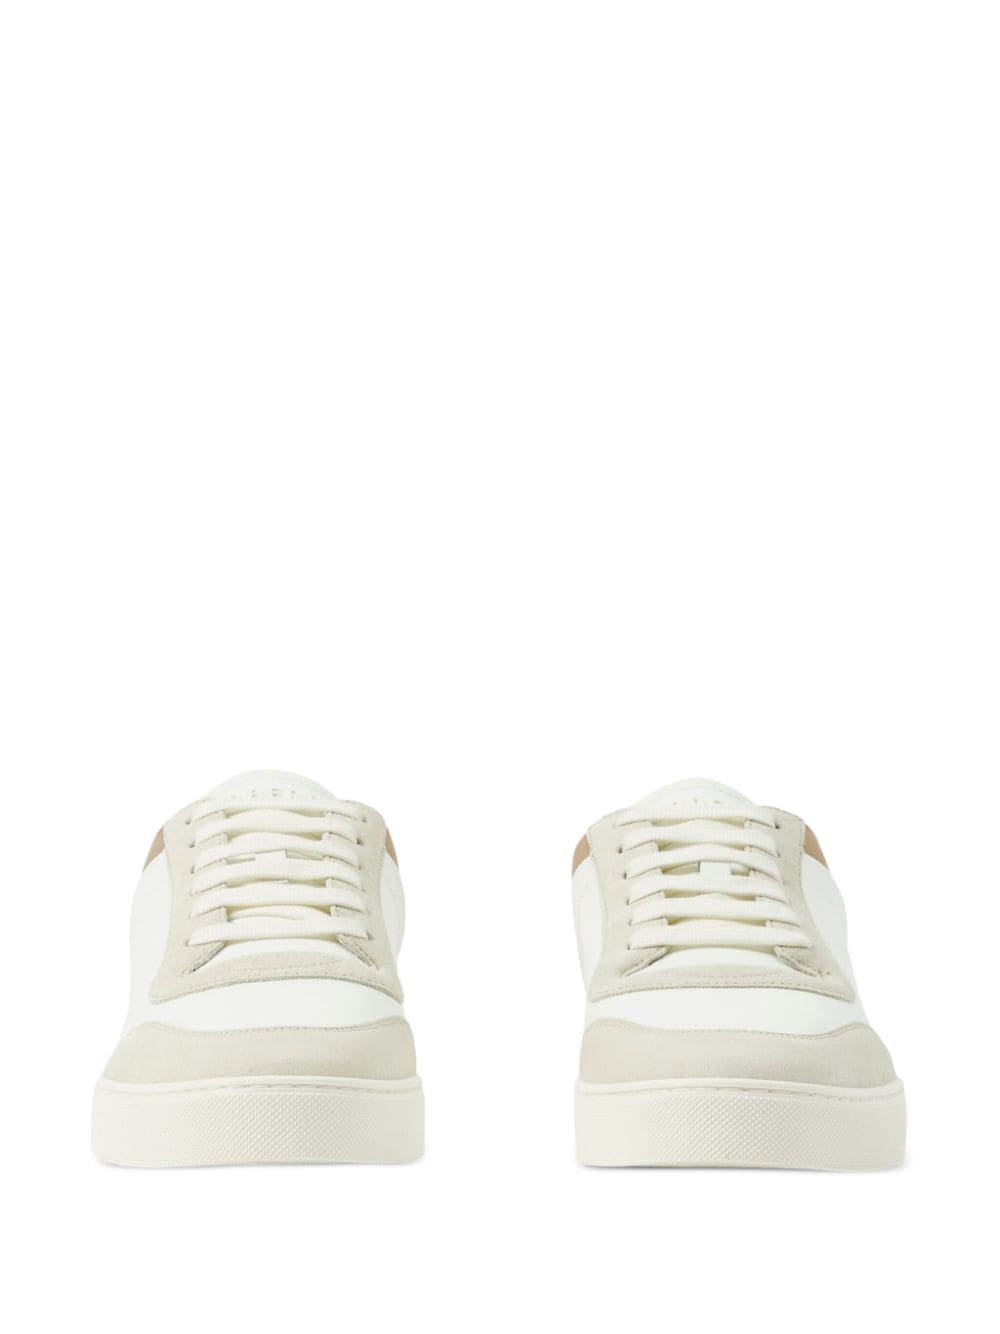 Shop Burberry Vintage Check Panelled Leather Sneakers For Men In White